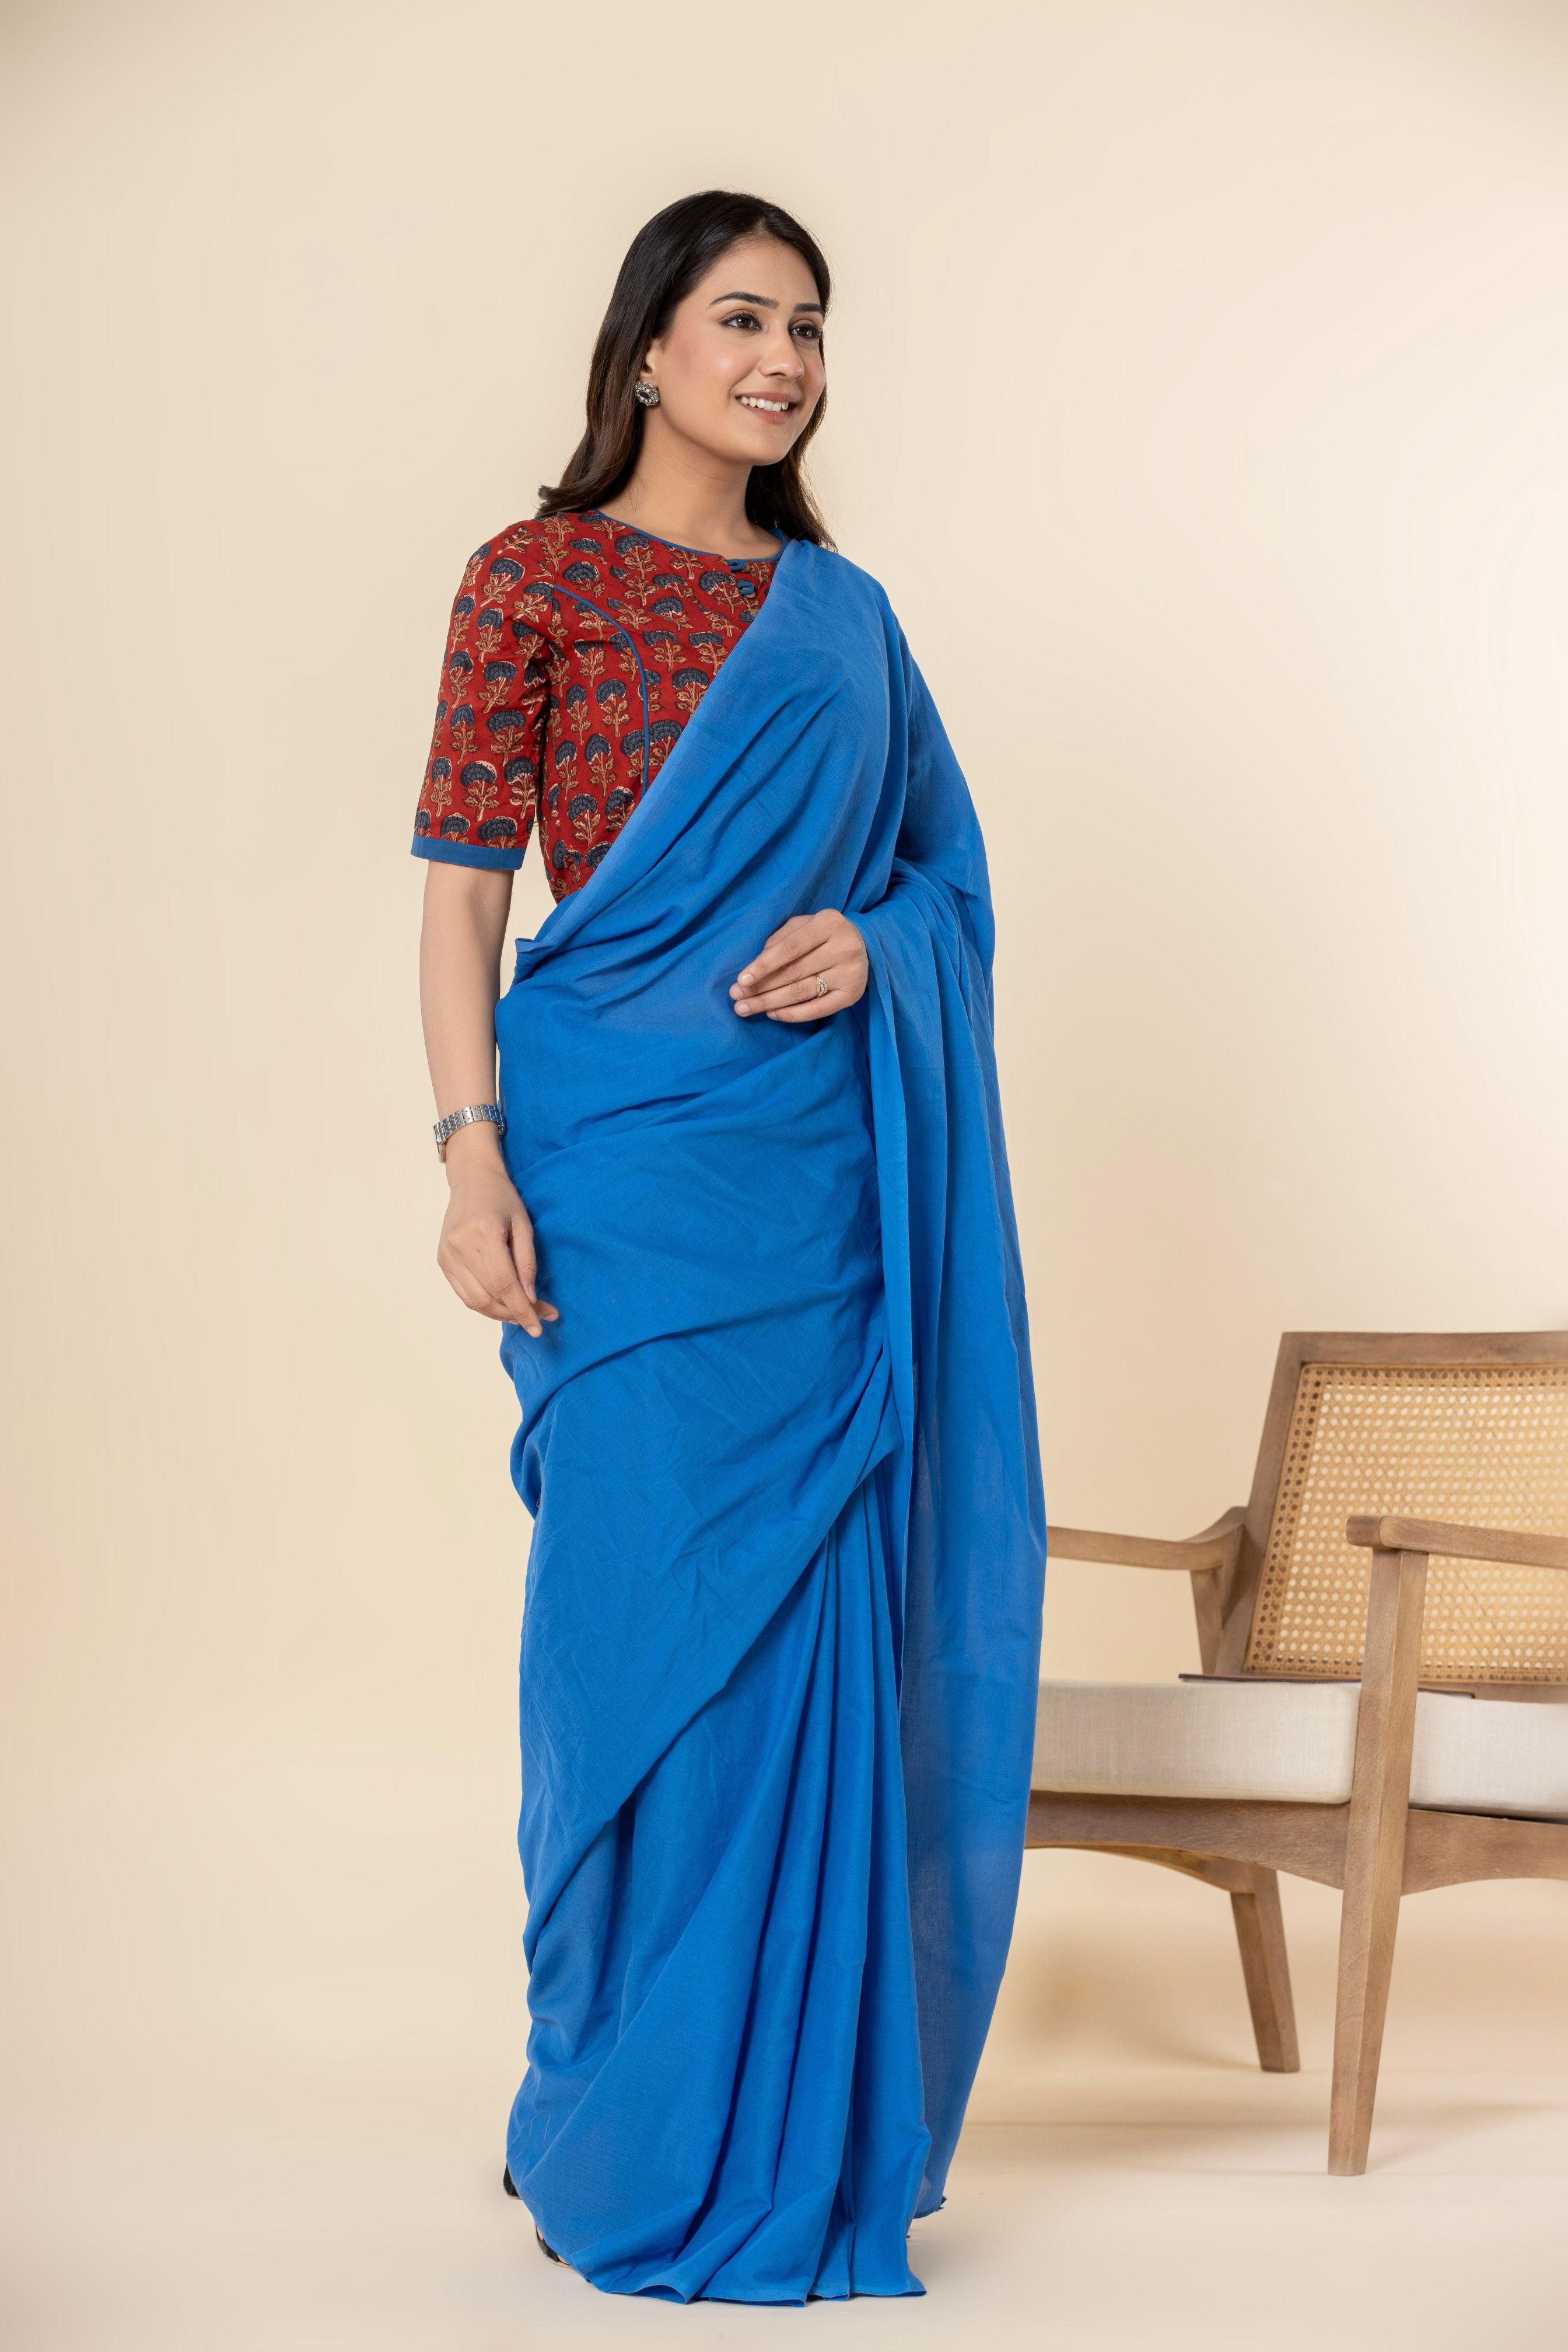 Ocean Blue Dyed Mul Mul Cotton Saree with Tassels (without Blouse)